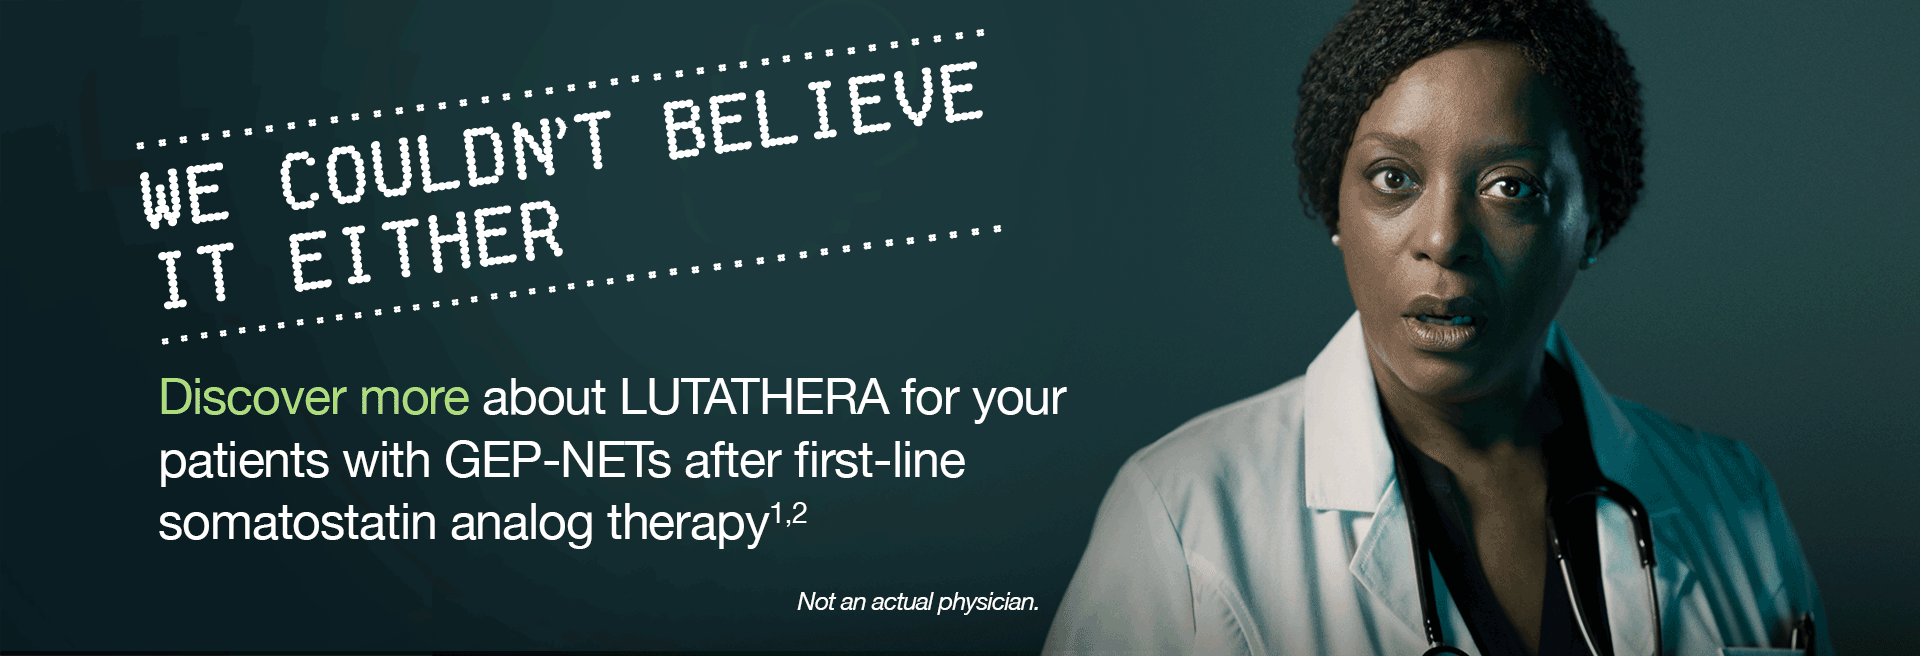 We couldn’t believe it either. Discover more about LUTATHERA for your patients with GEP-NETs after first-line somatostatin analog therapy...